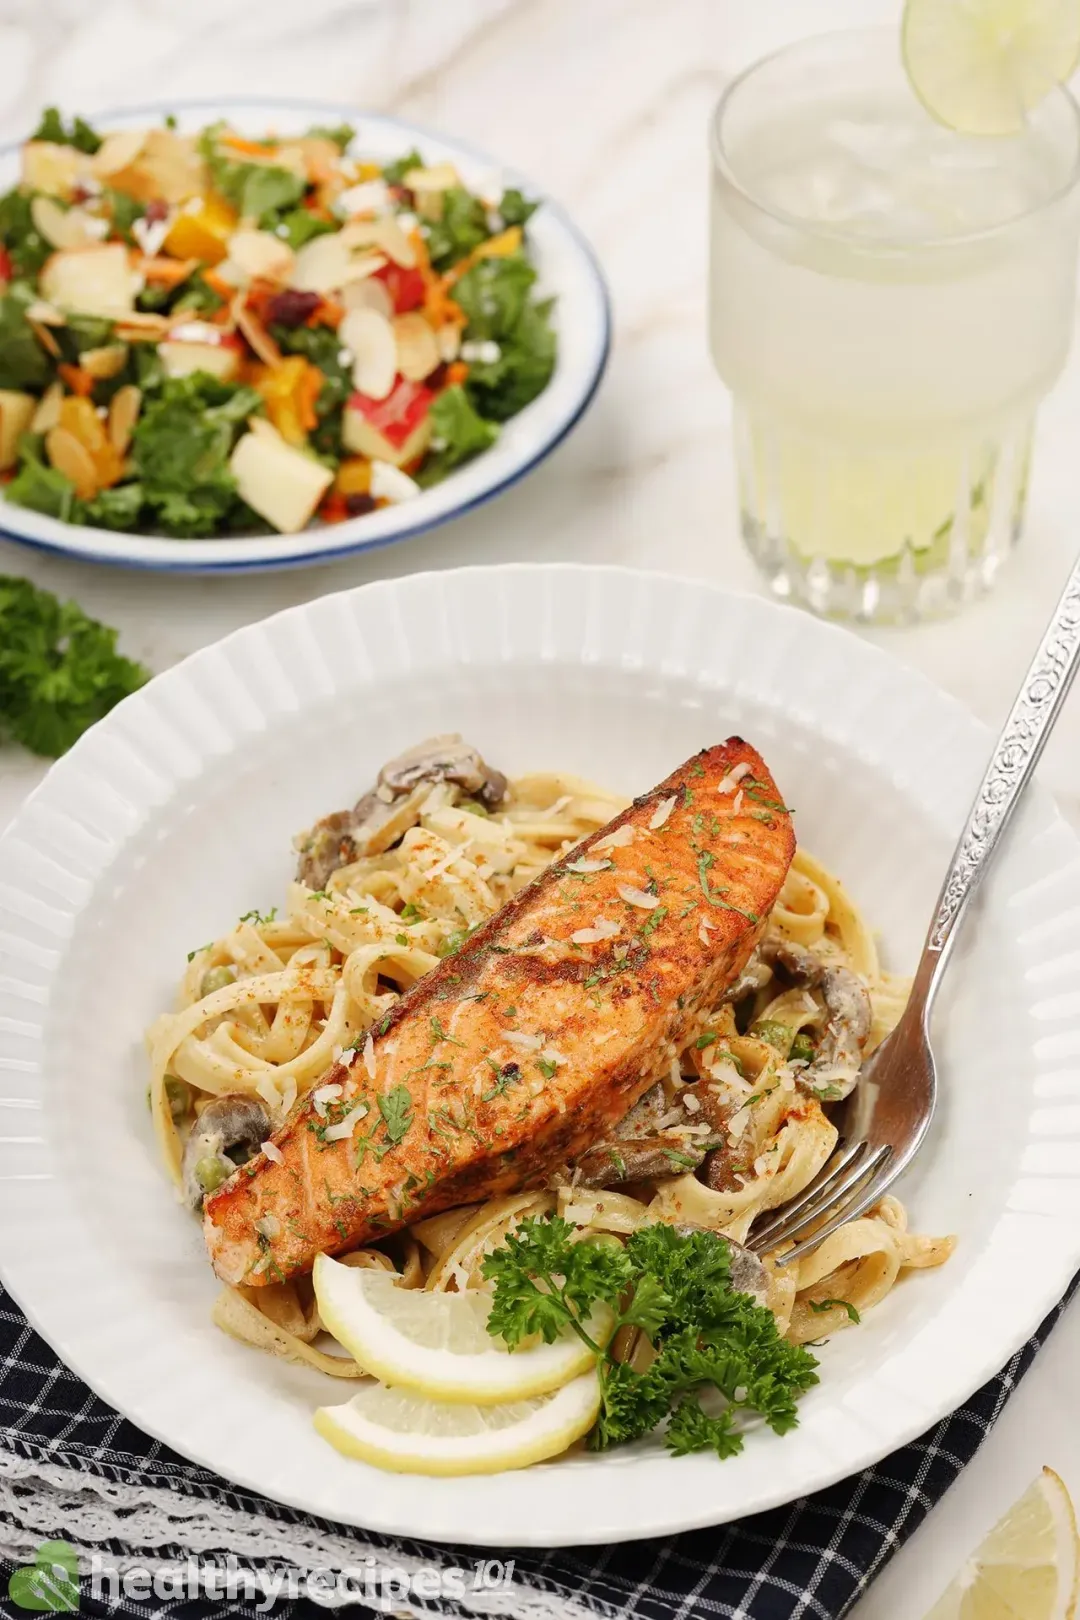 A plate of salmon al fresco, containing a bright orange cooked salmon fillet laid on a bed of fettuccine pasta, decorated by fresh parsley, lemon slices, and a fork